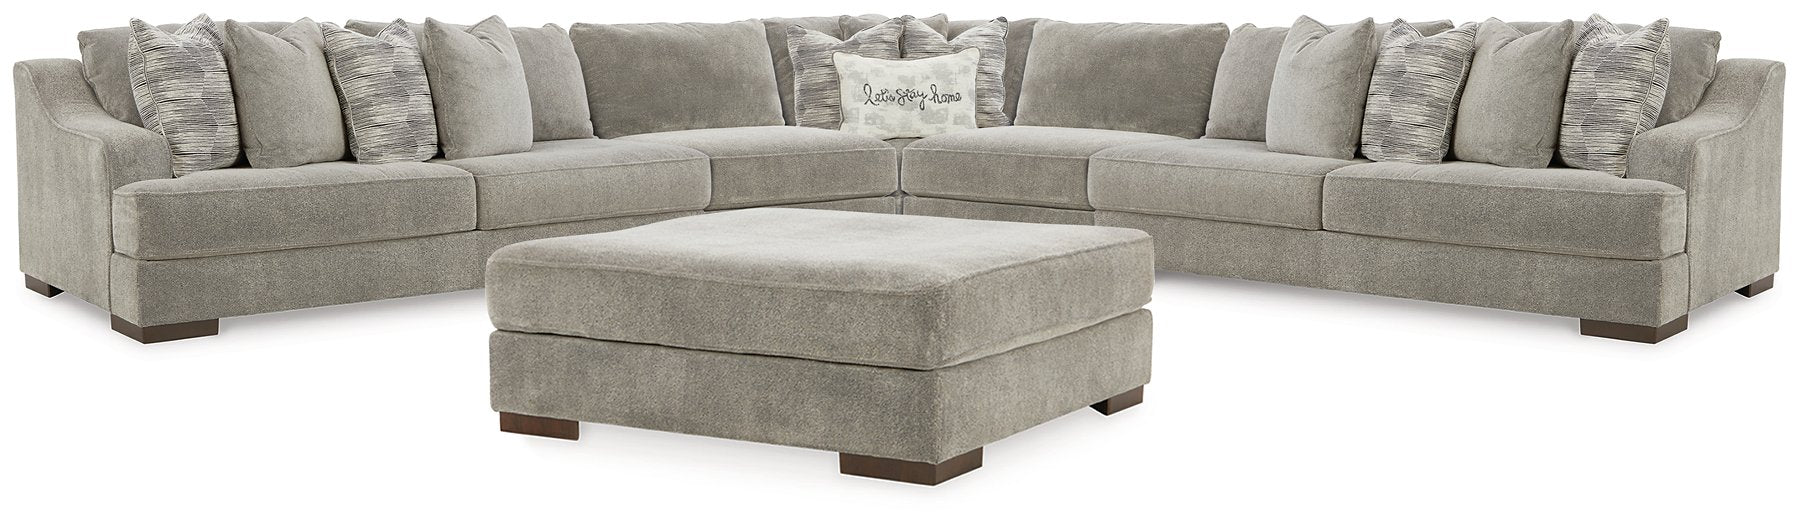 Bayless Living Room Set - Tallahassee Discount Furniture (FL)